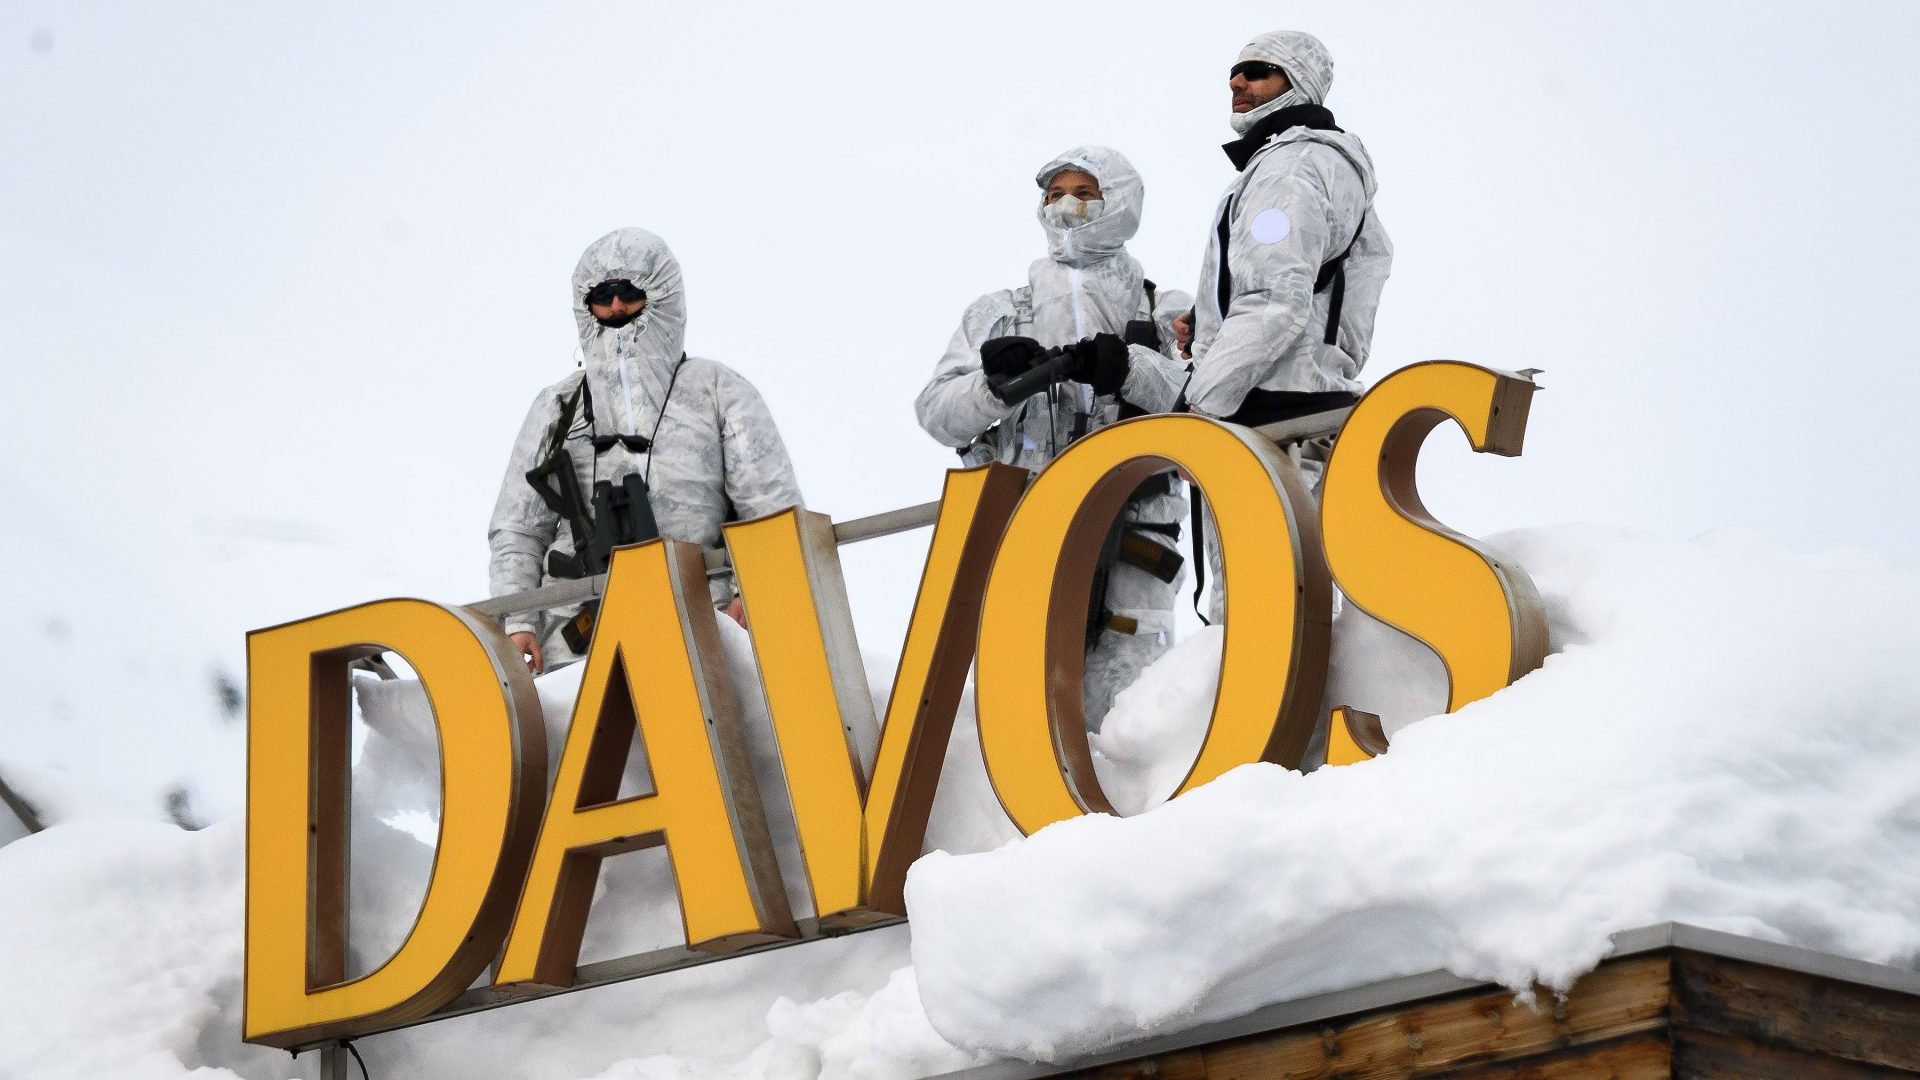 Armed security men stand guard on top of a hotel in Davos, where the great and not-so-good will gather for the annual forum. Photo: Fabrice Coffrini/AFP/Getty